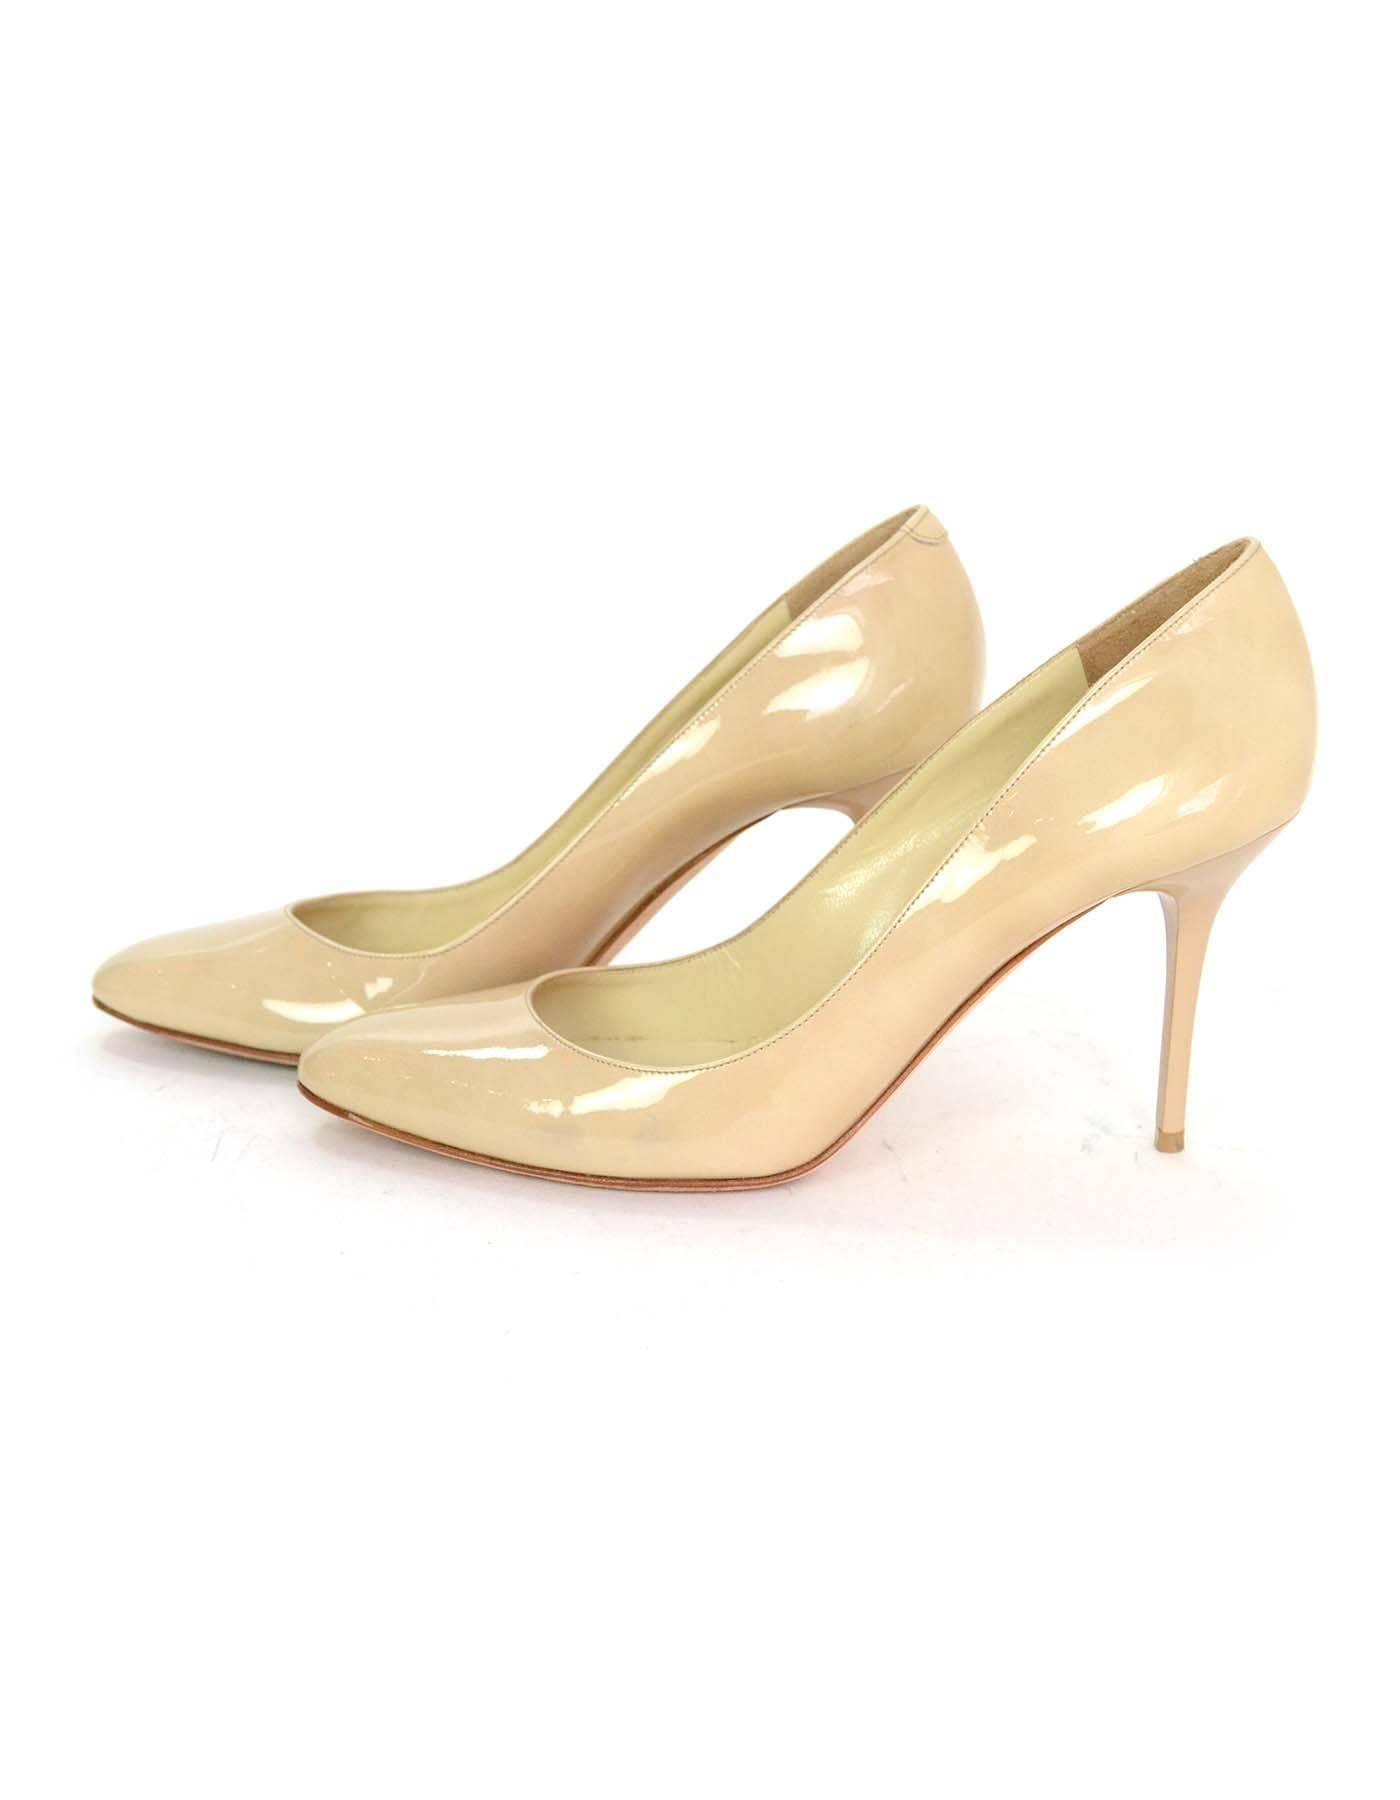 Jimmy Choo Nude Patent Leather Pumps Sz 37.5

Made In: Italy
Color: Nude
Materials: Patent leather
Closure/Opening: Slide on
Sole Stamp: Jimmy Choo London Made in Italy 37.5
Overall Condition: Excellent pre-owned condition with the exception